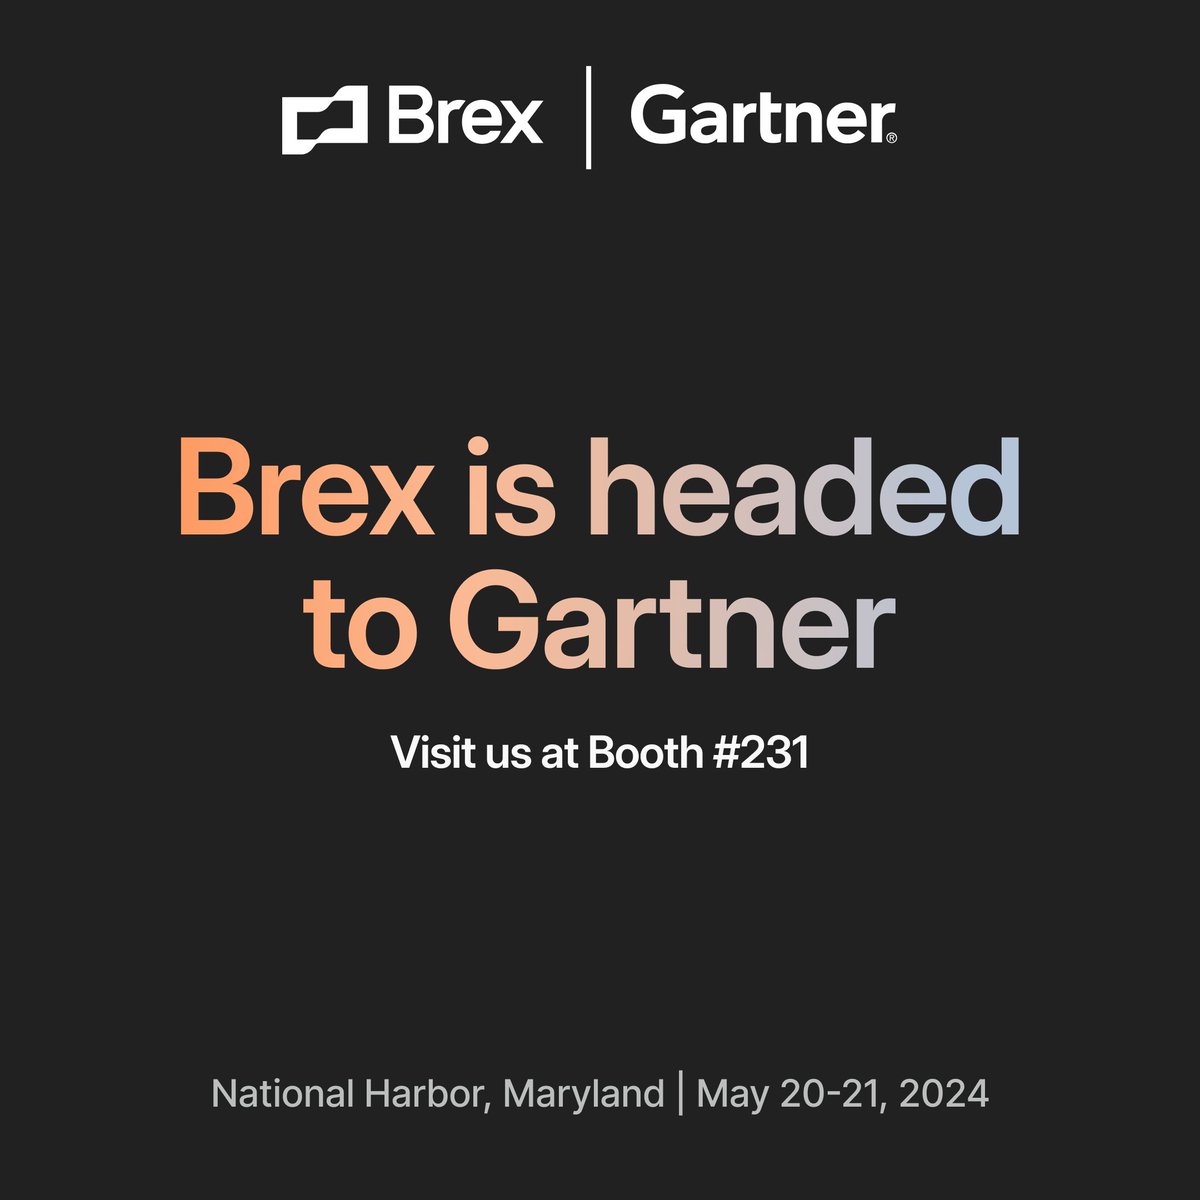 Come meet team Brex at this year's @Gartner_inc CFO Conference! We'll be at booth #231 from May 20-21 to show you how top companies automate busywork and control spend before it happens—all using Brex. #GartnerCFO Learn more: bit.ly/4aJ0in7